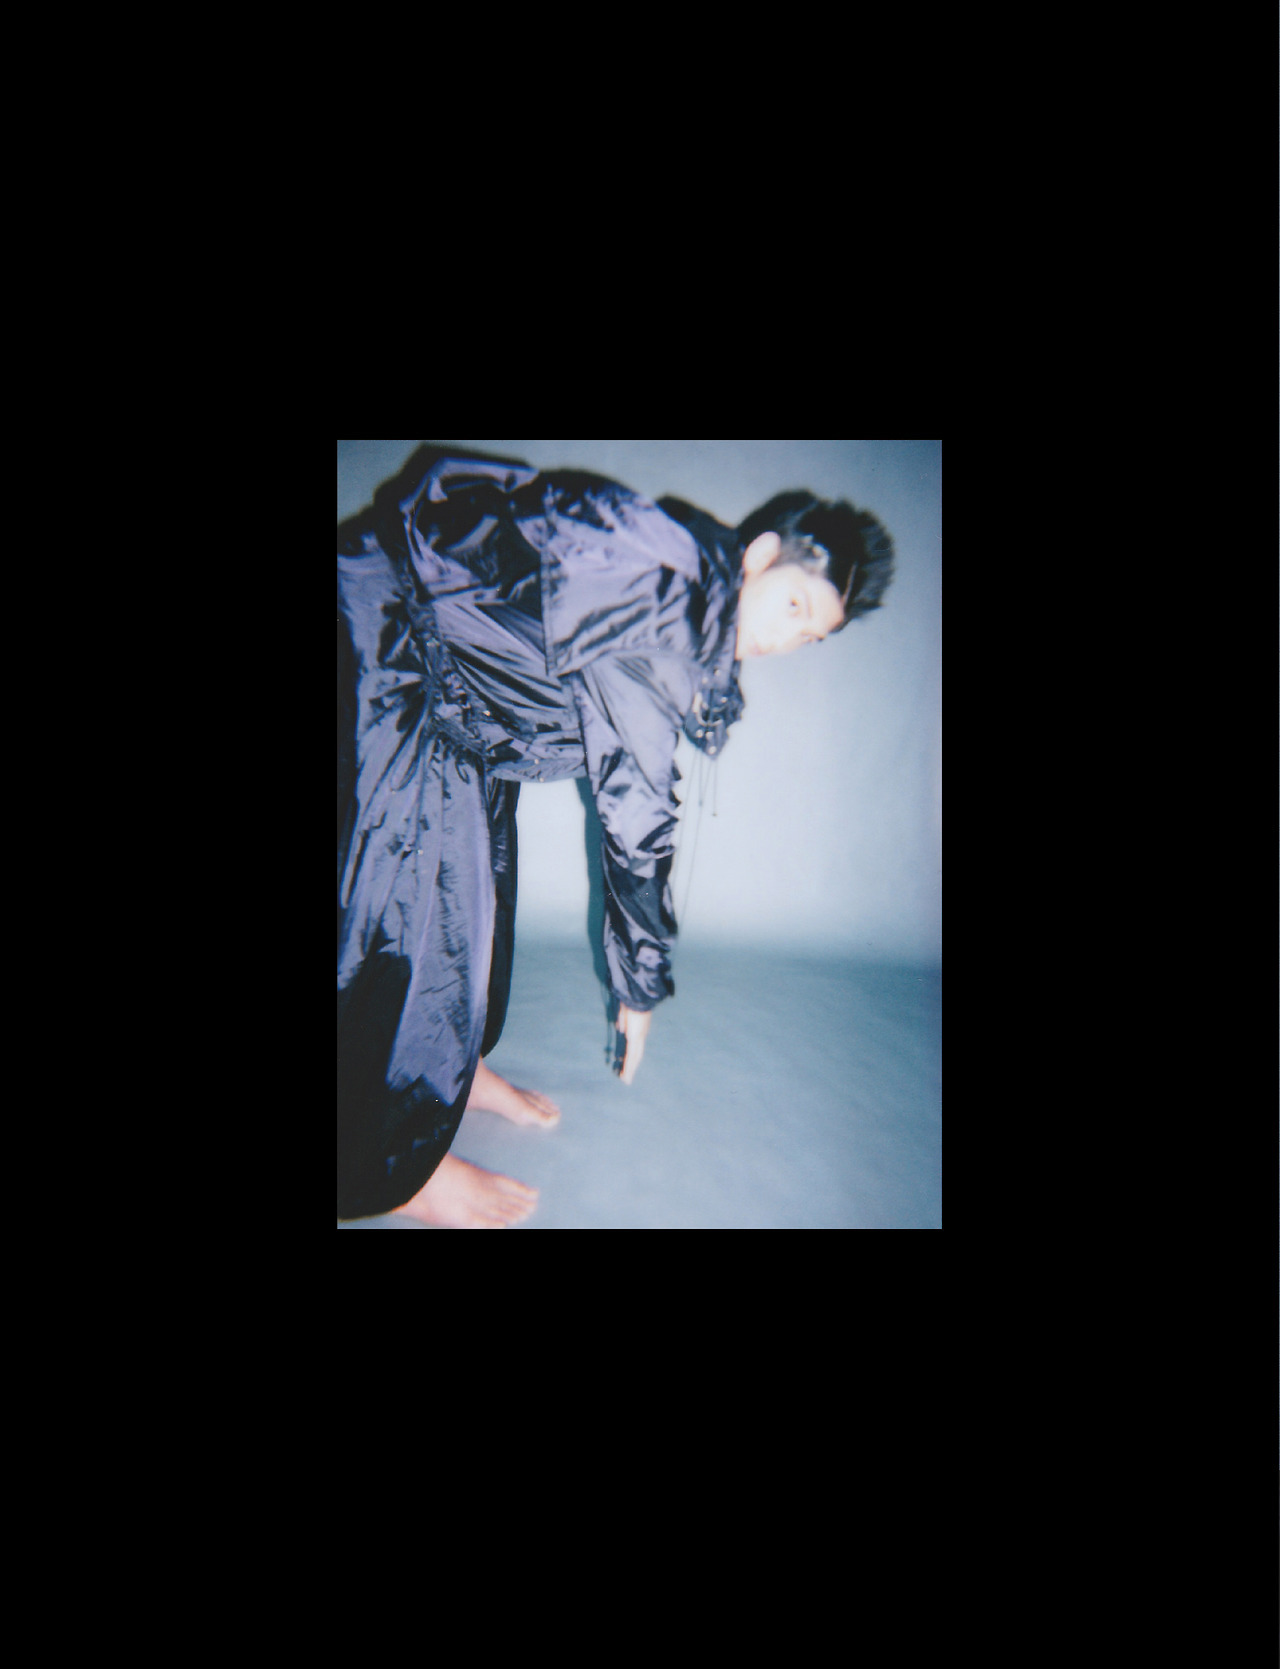 sk-tang1: “ANYONE BUT US” for Coeval Magazine photography - ISSAC LAM (instagram)styling